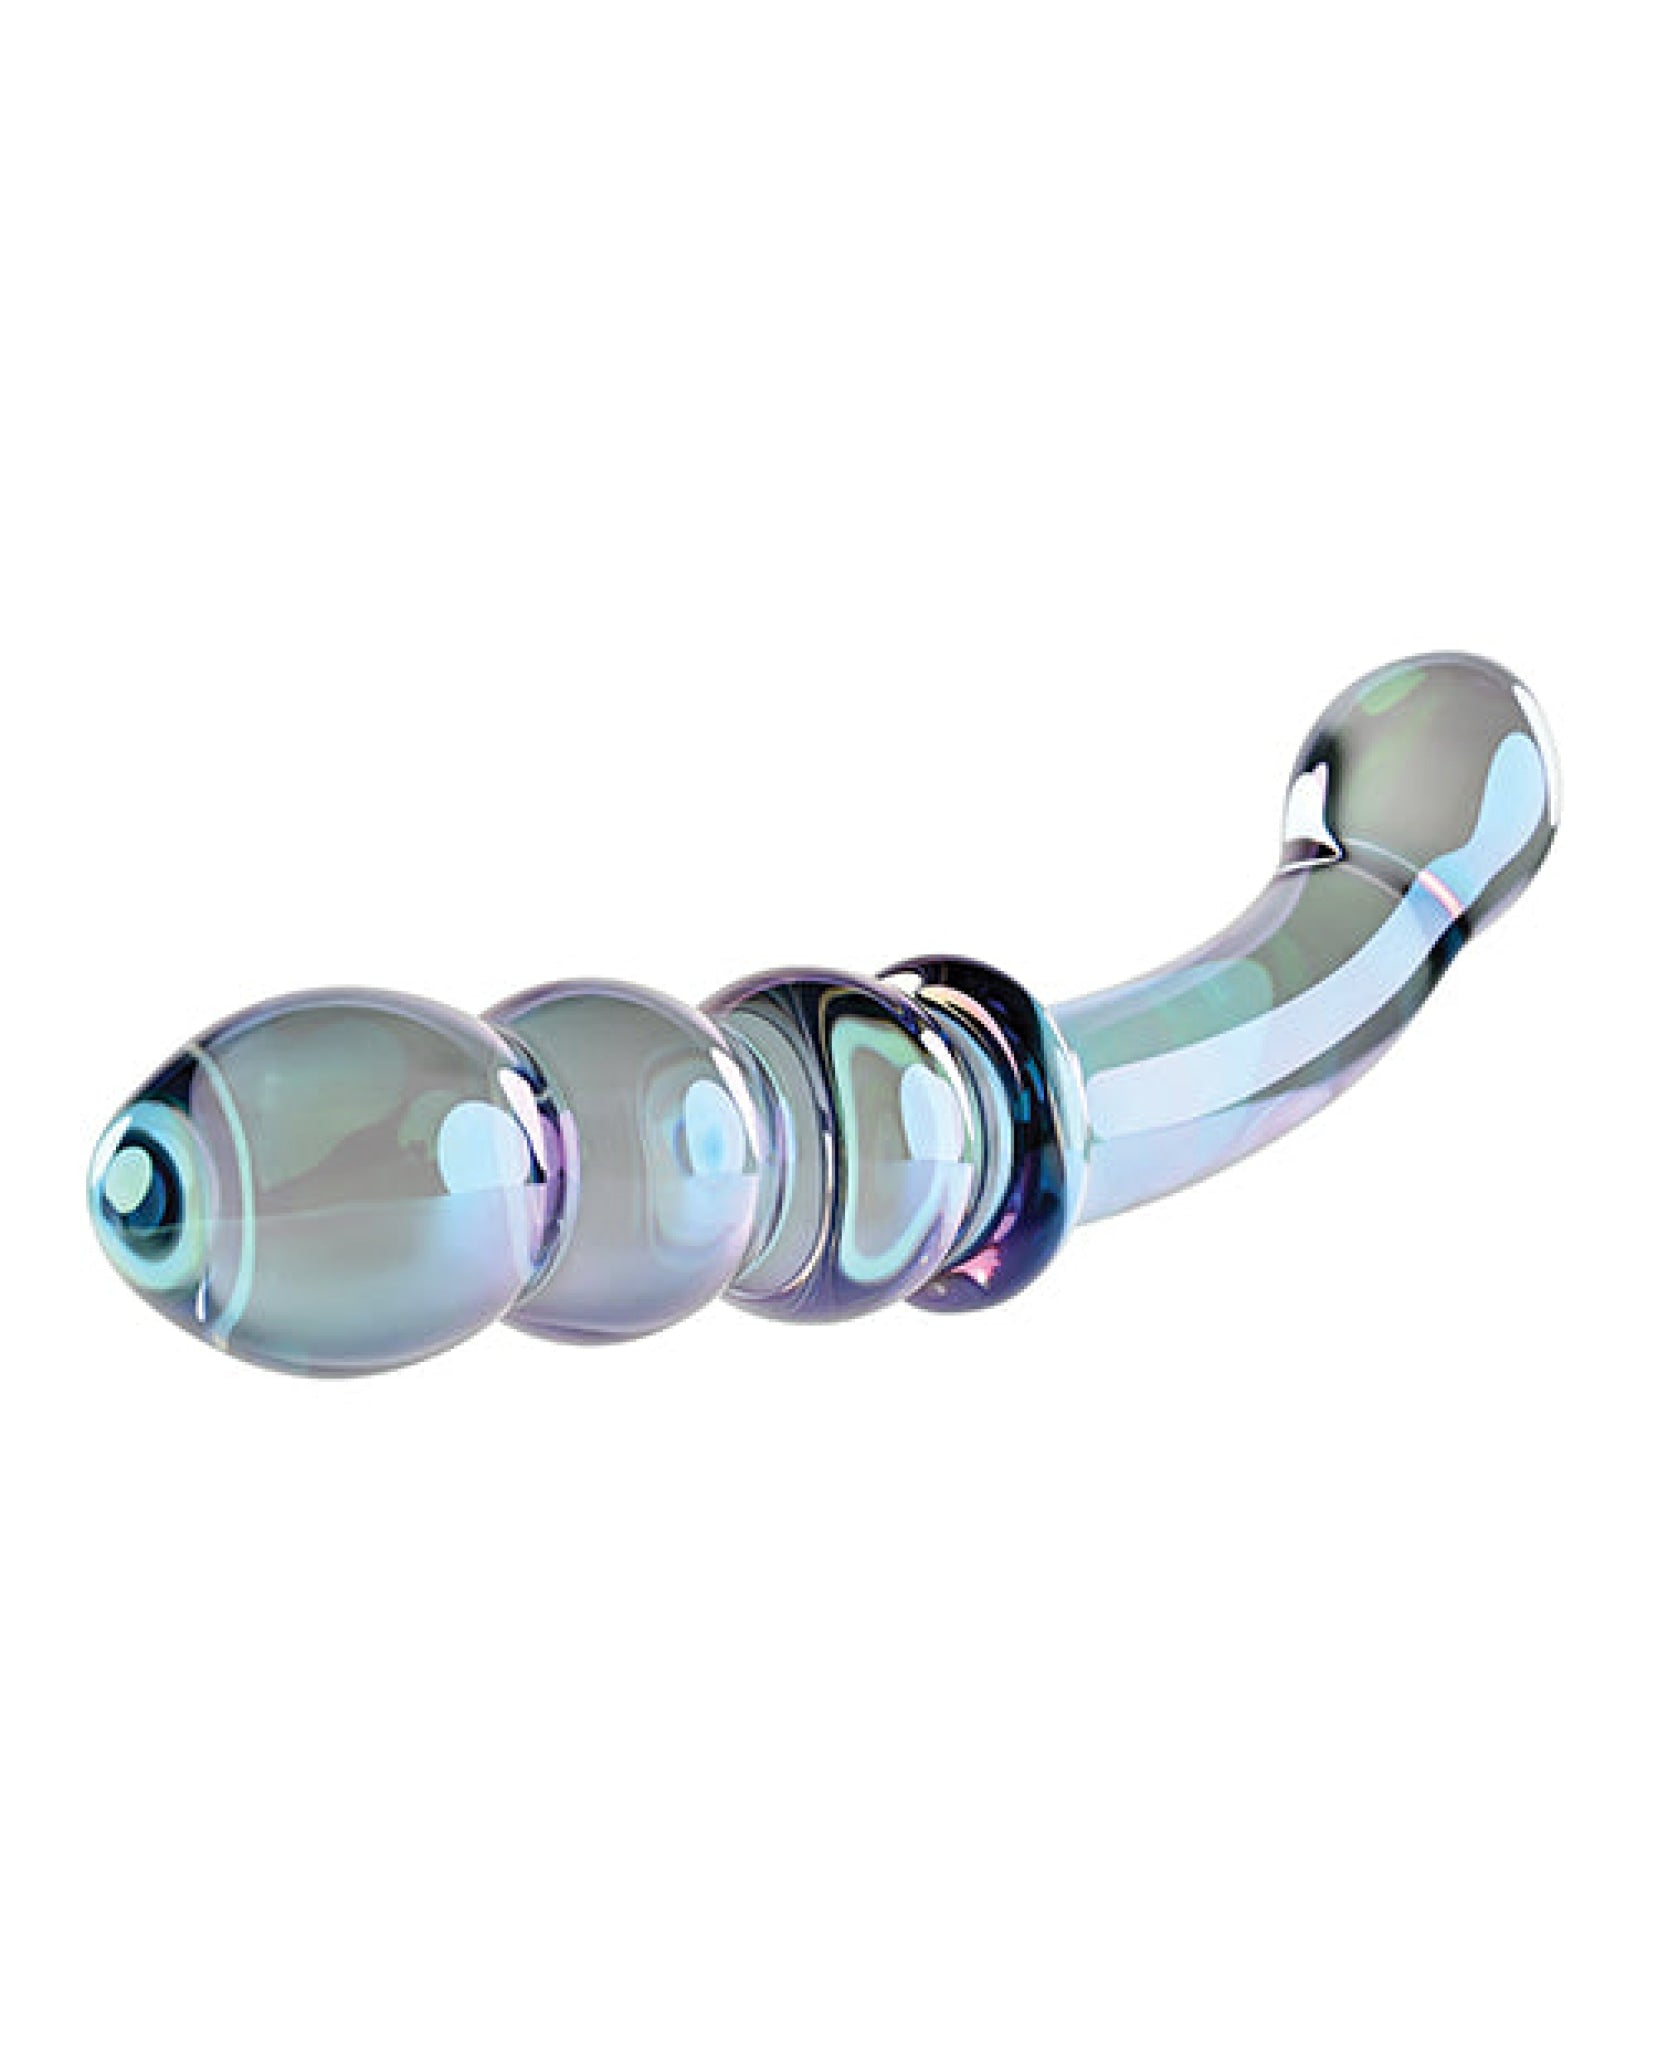 Gender X Lustrous Galaxy Wand Dual Ended Glass Massager - Green Gender X